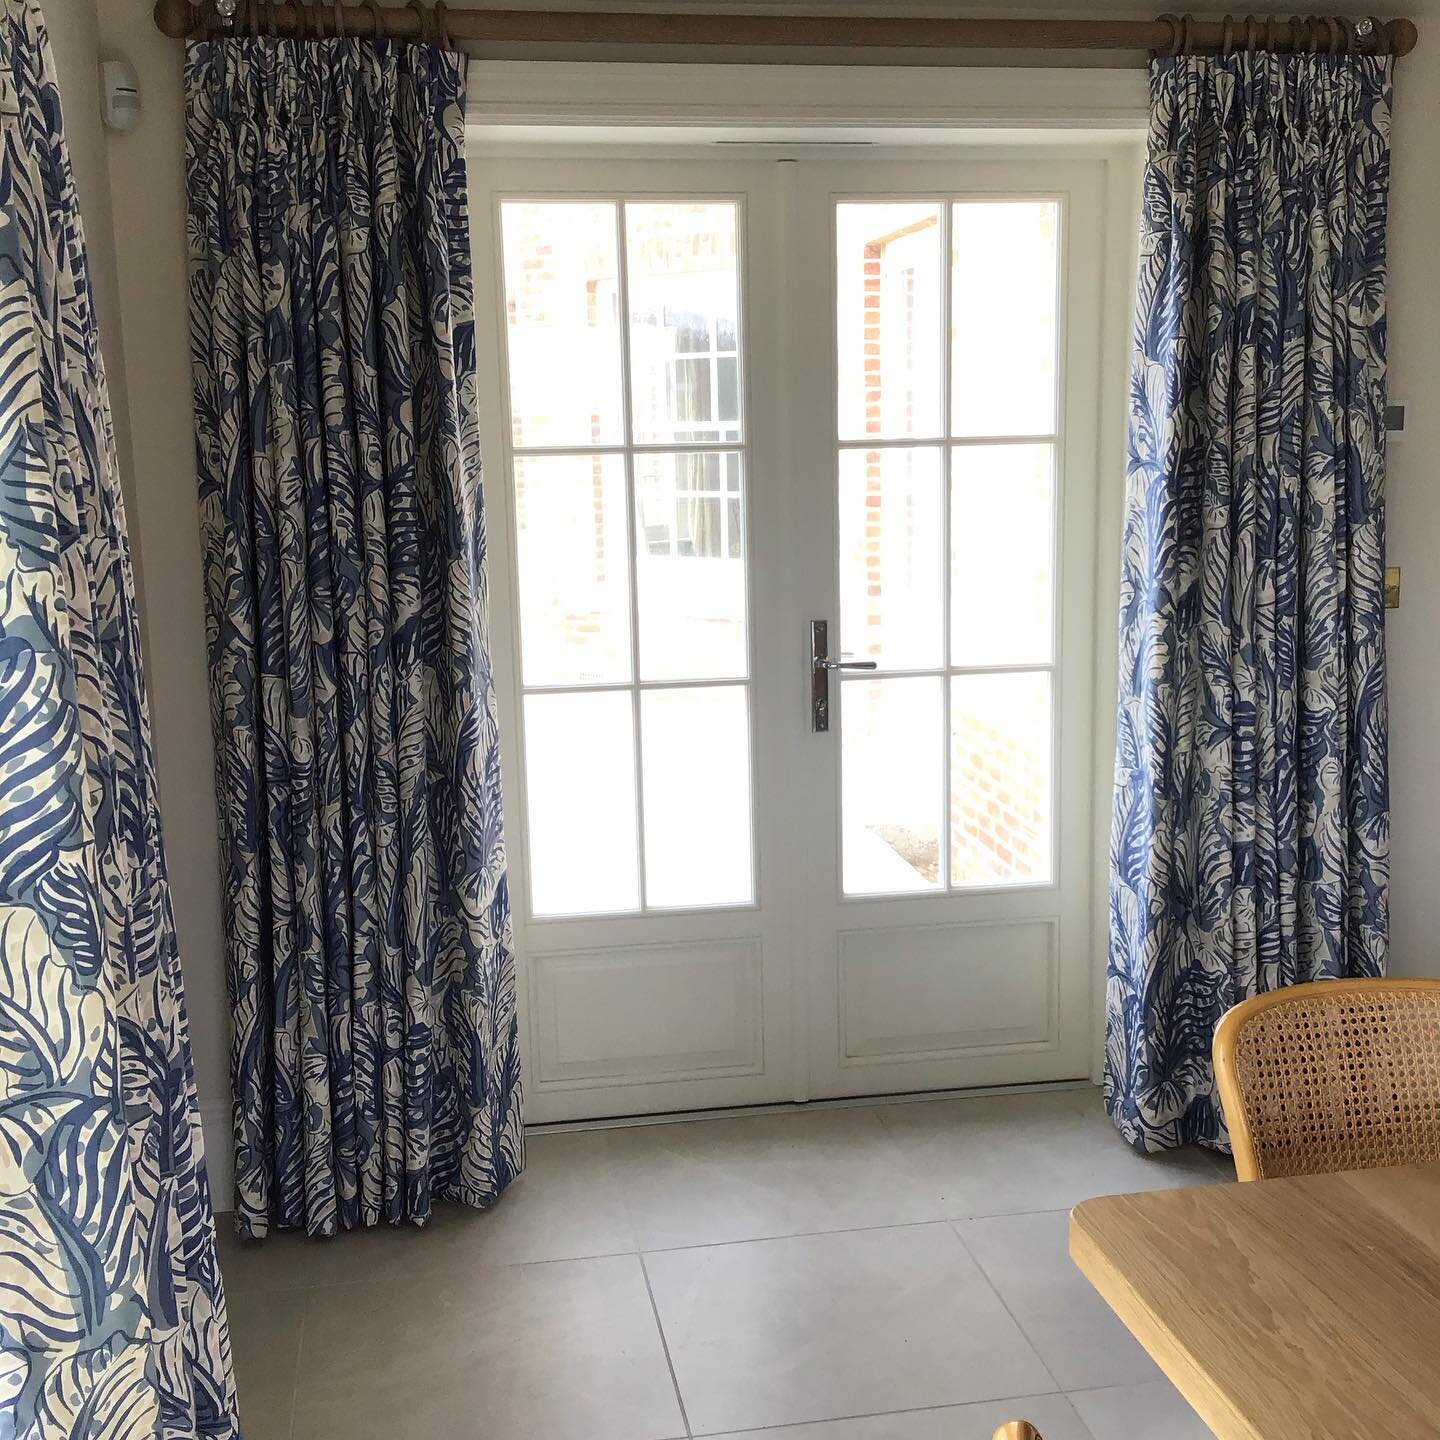 This is one of our most recent and exciting commissions in a beautiful newly constructed country house using a fabulous fabric designed by Raoul Dufy.  He was a French Fauvist painter, brother of Jean Dufy. He developed a colourful decorative style t